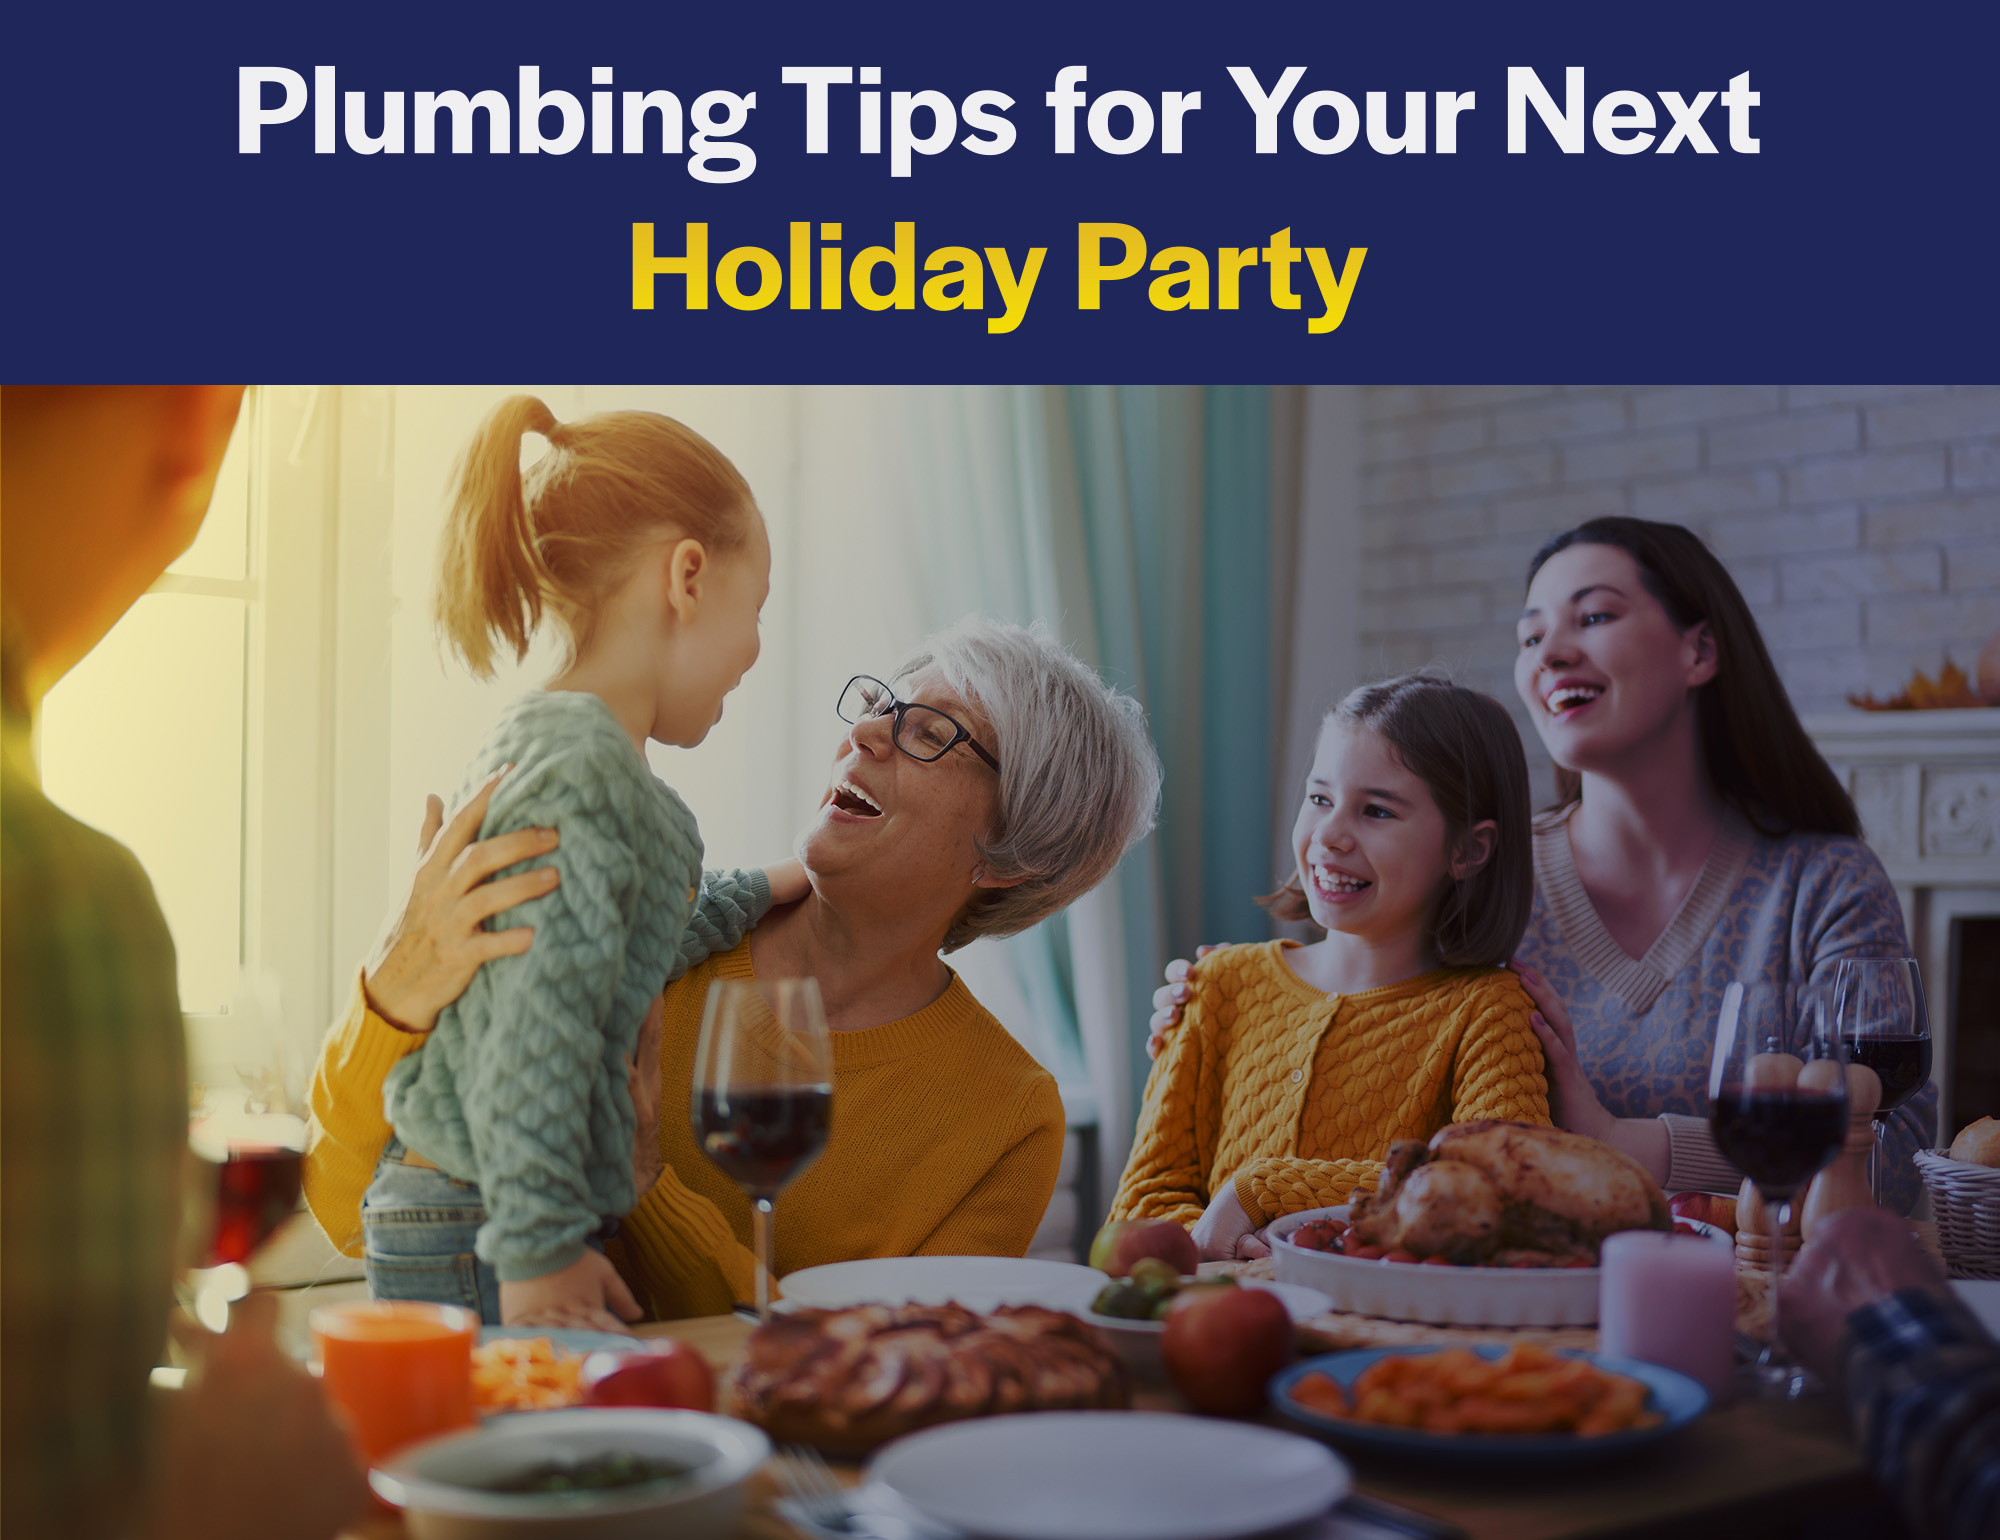 Plumbing tips for your next holiday party